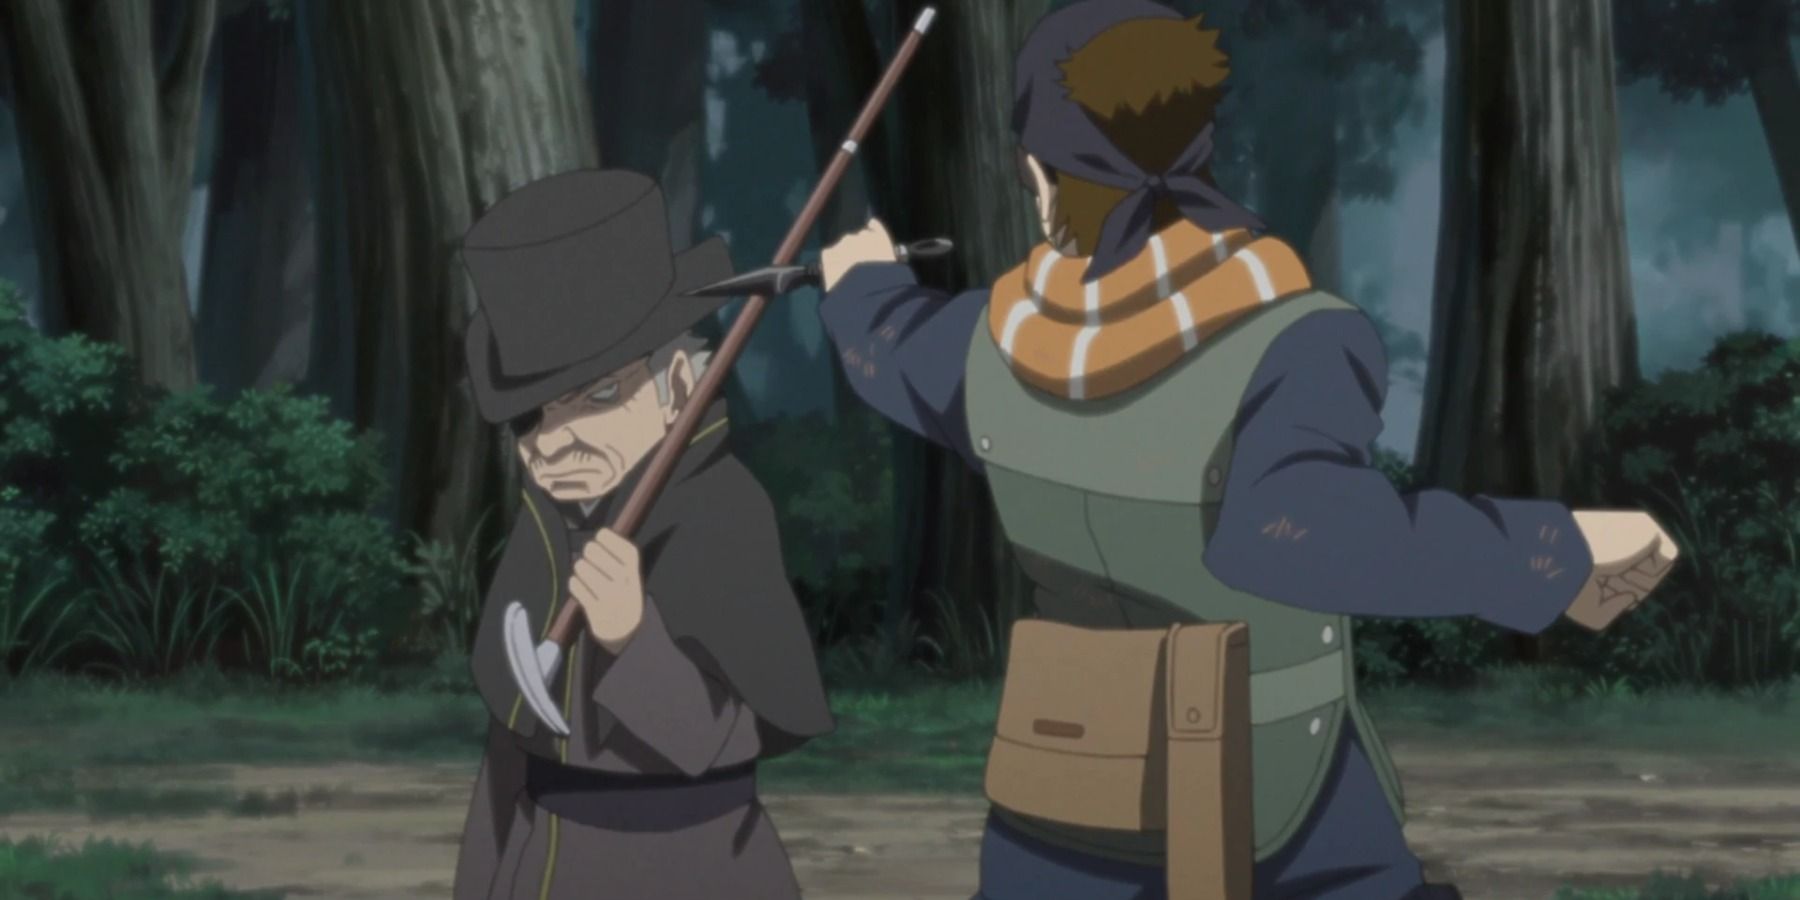 victor fighting with a shinobi